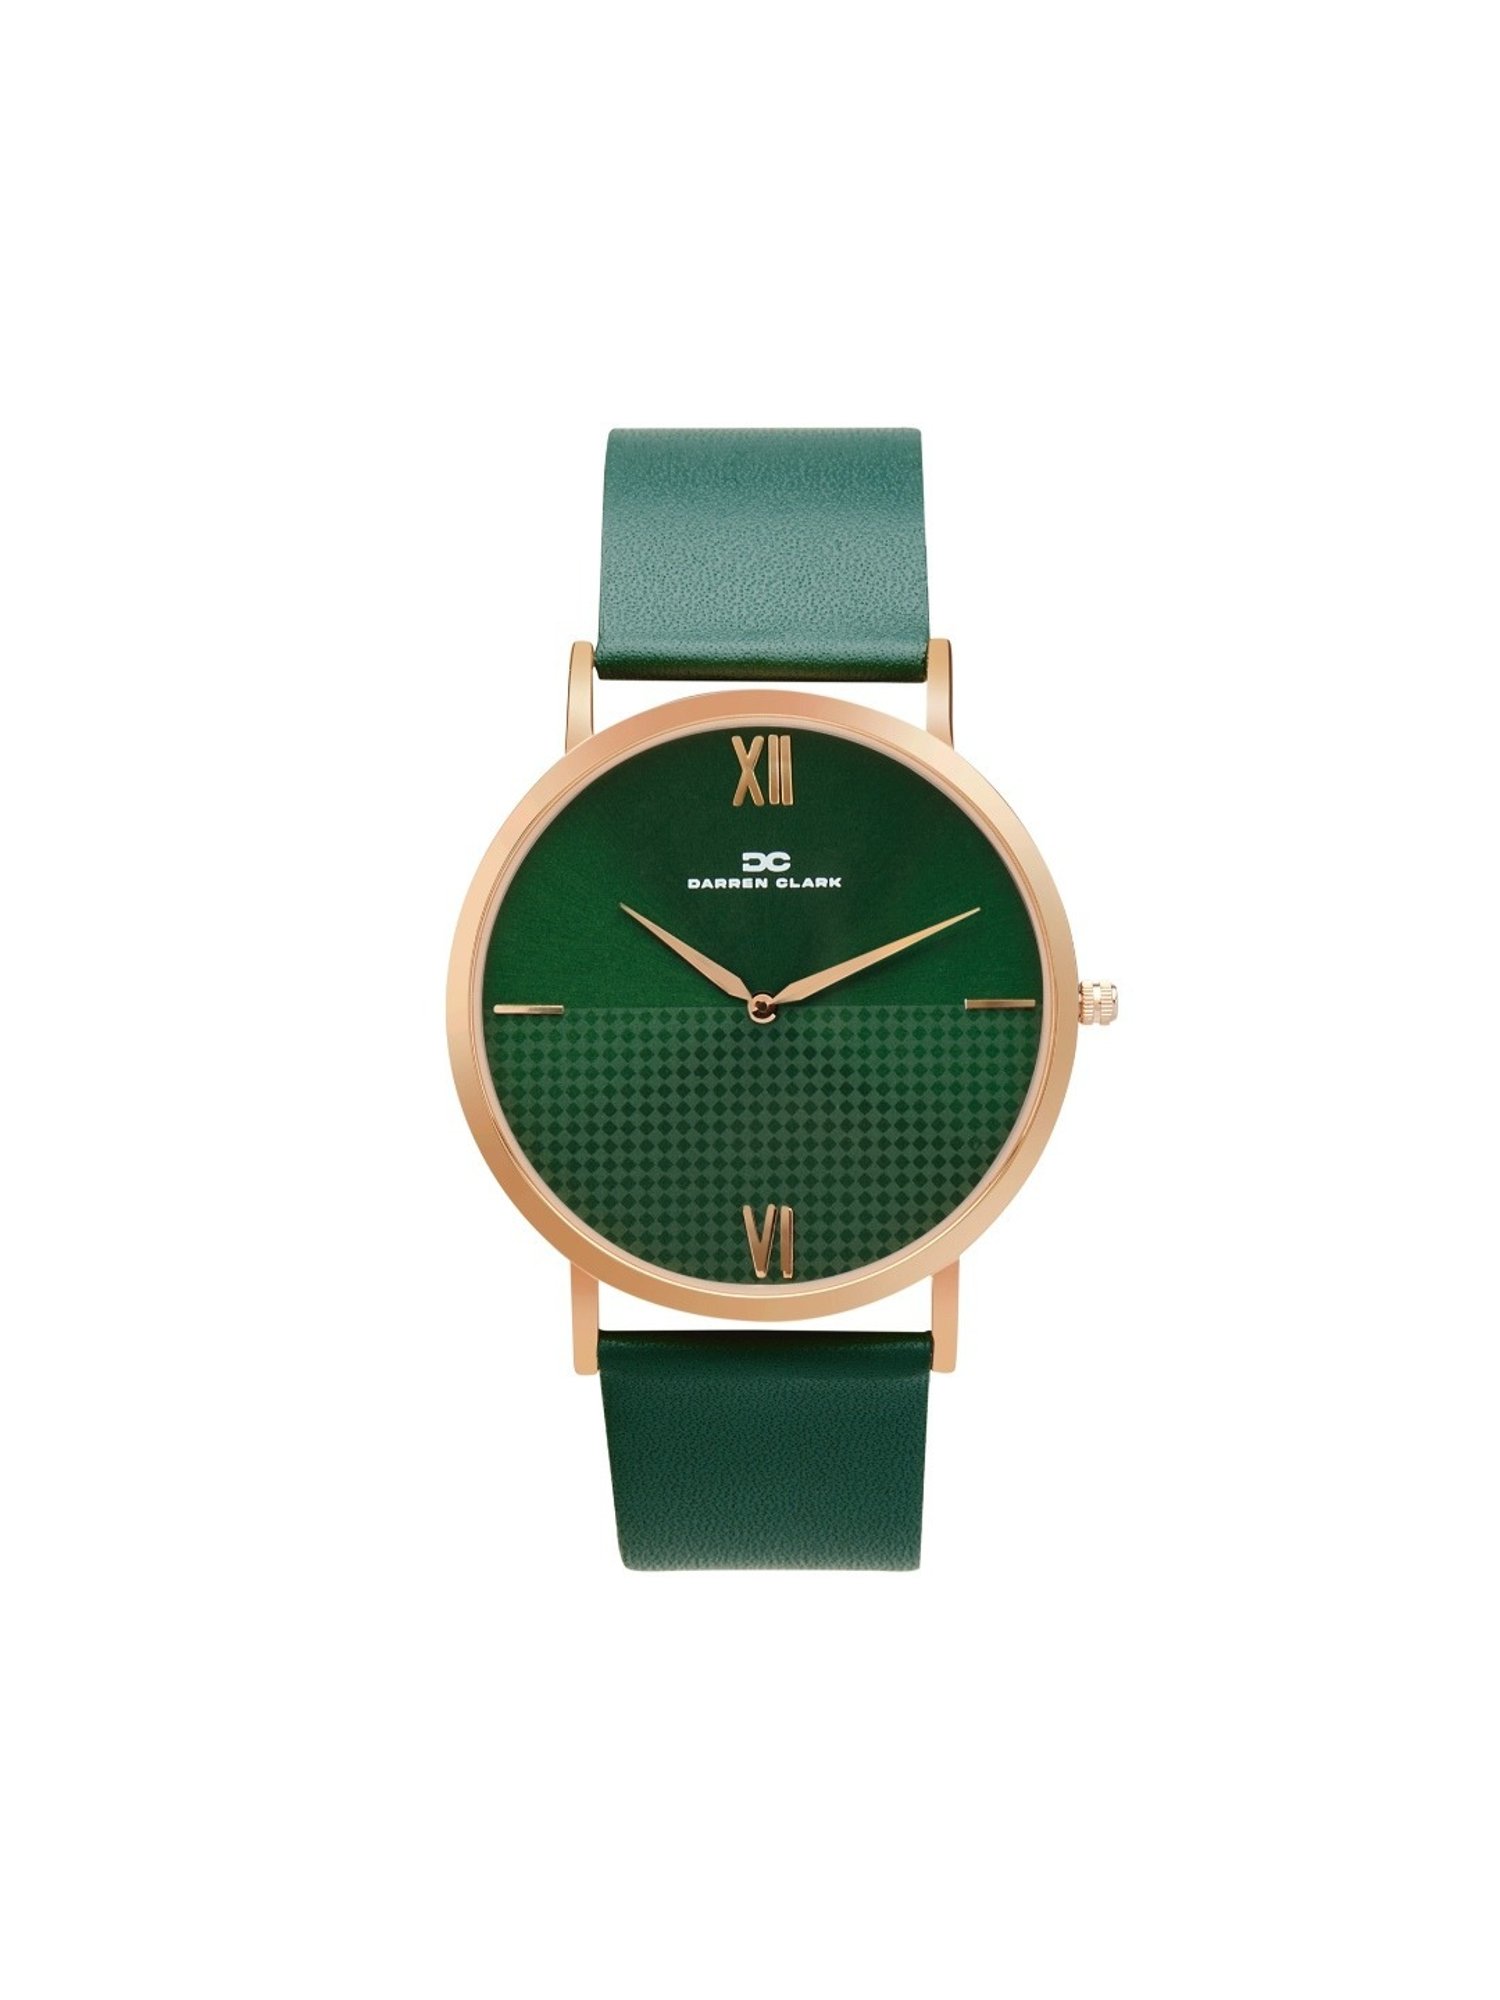 Buy Tommy Hilfiger Clark Green Dial Analog Watch for Men TH1792079 (Large)  Online